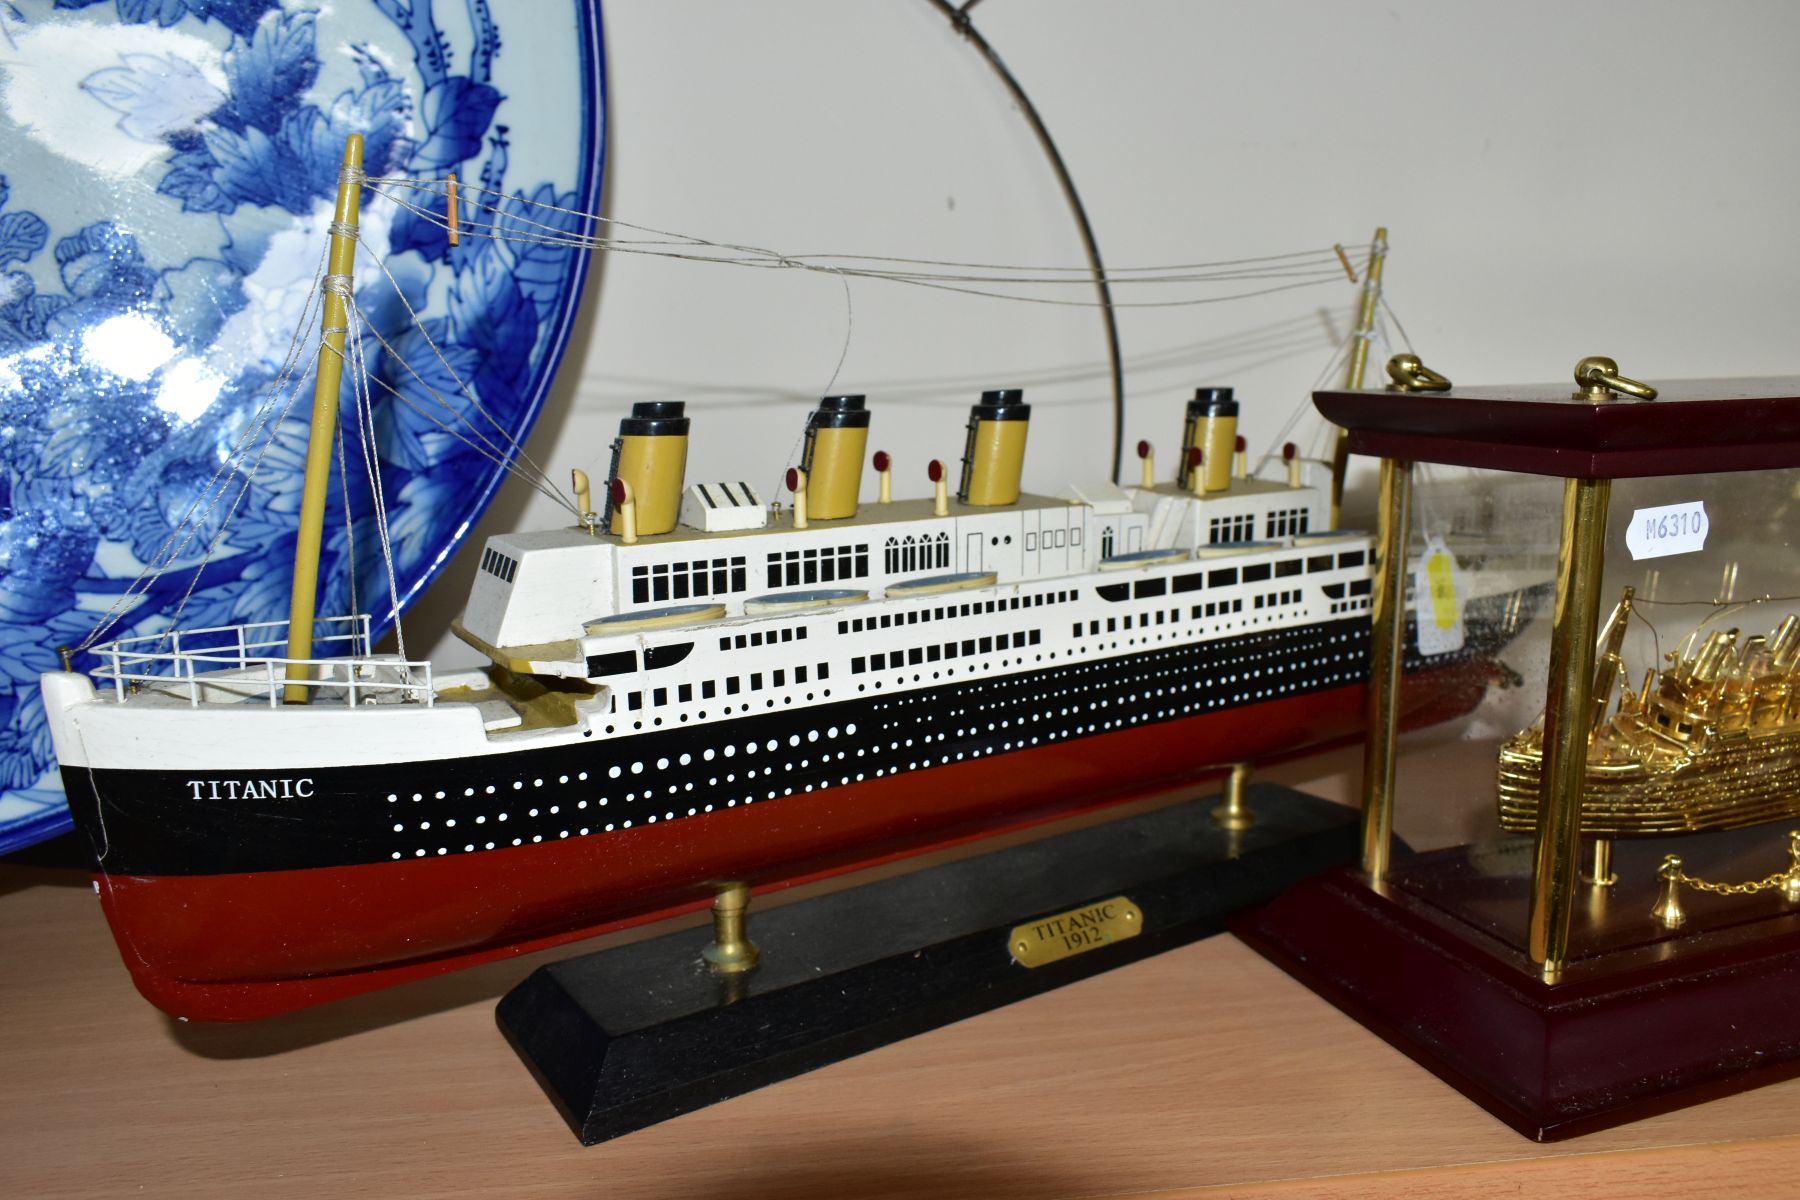 TWO MODERN MODELS OF THE TITANIC, once in glass case, 35.5cm x 17cm x 12.5cm including case, ship is - Image 2 of 5